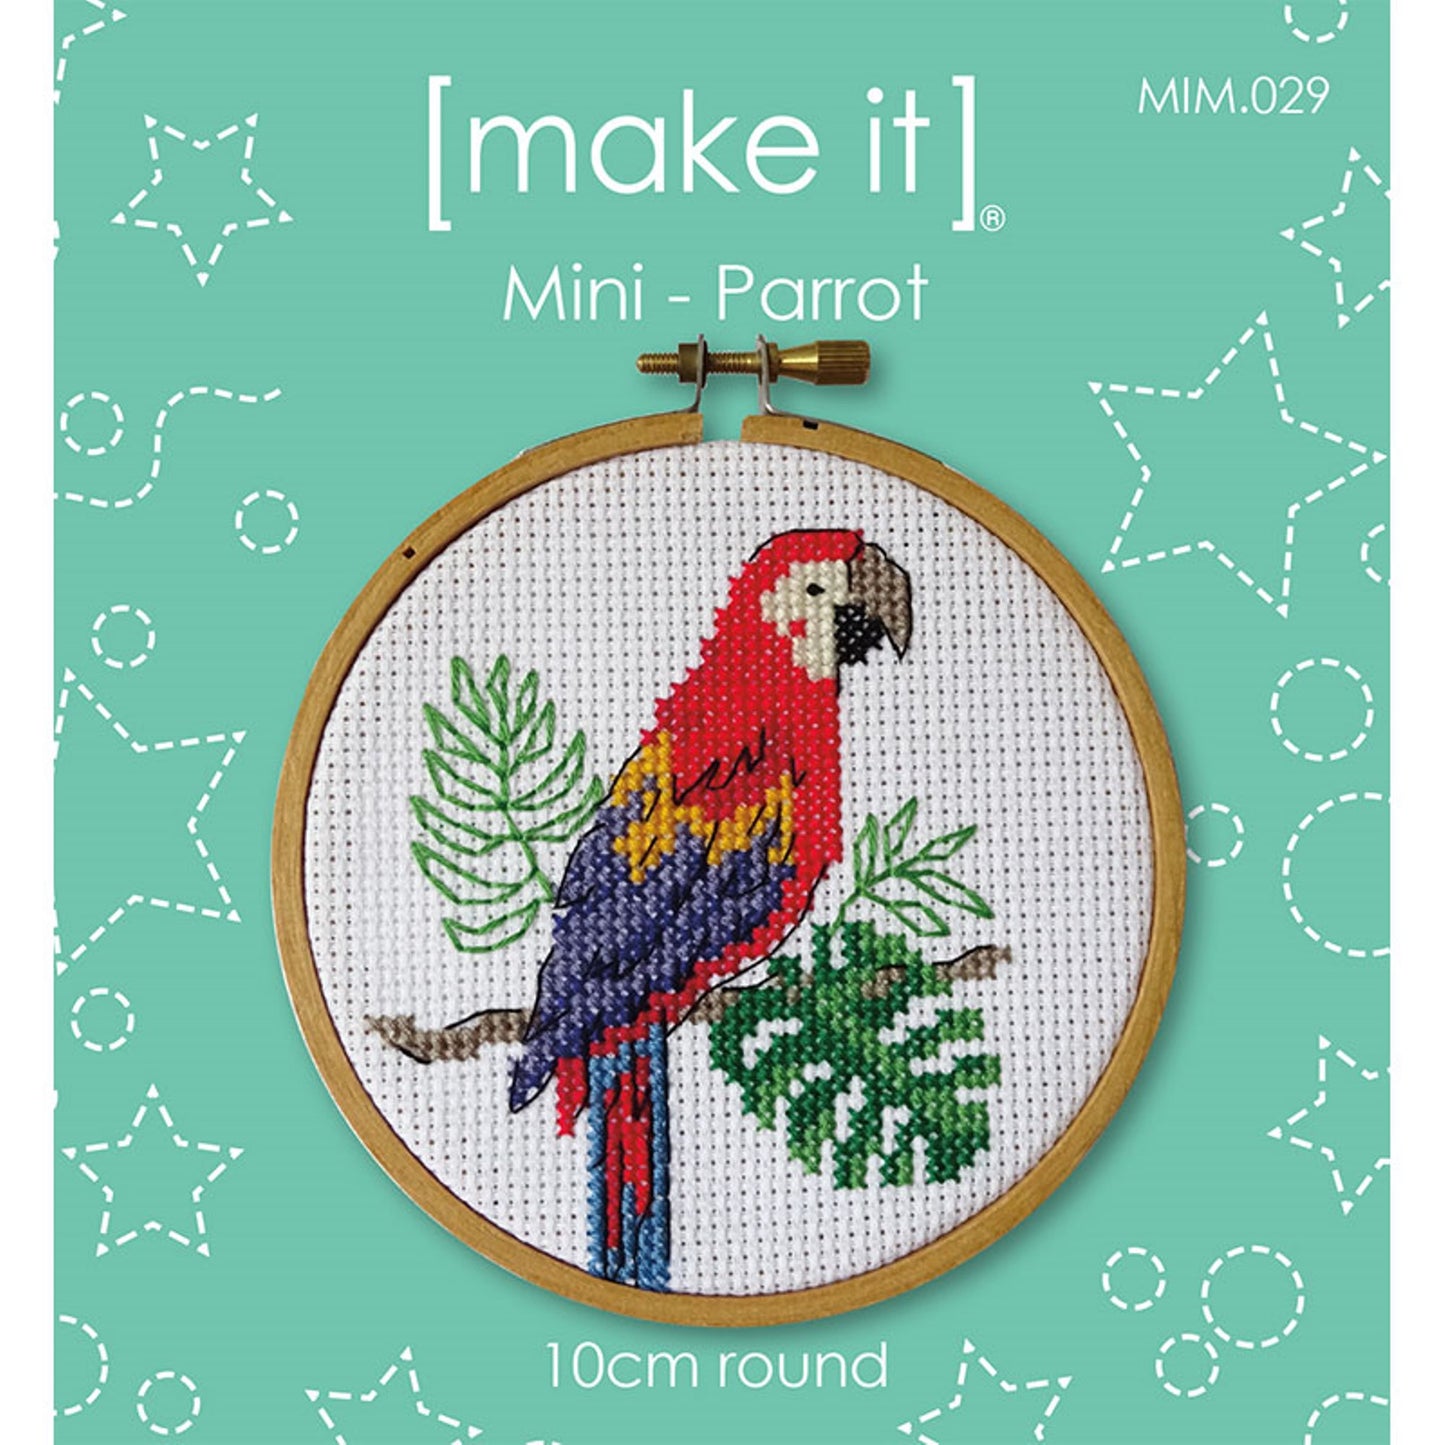 Cross stitch parrot with DMC threads, hoop, 14 count Aida craft kit suit beginners